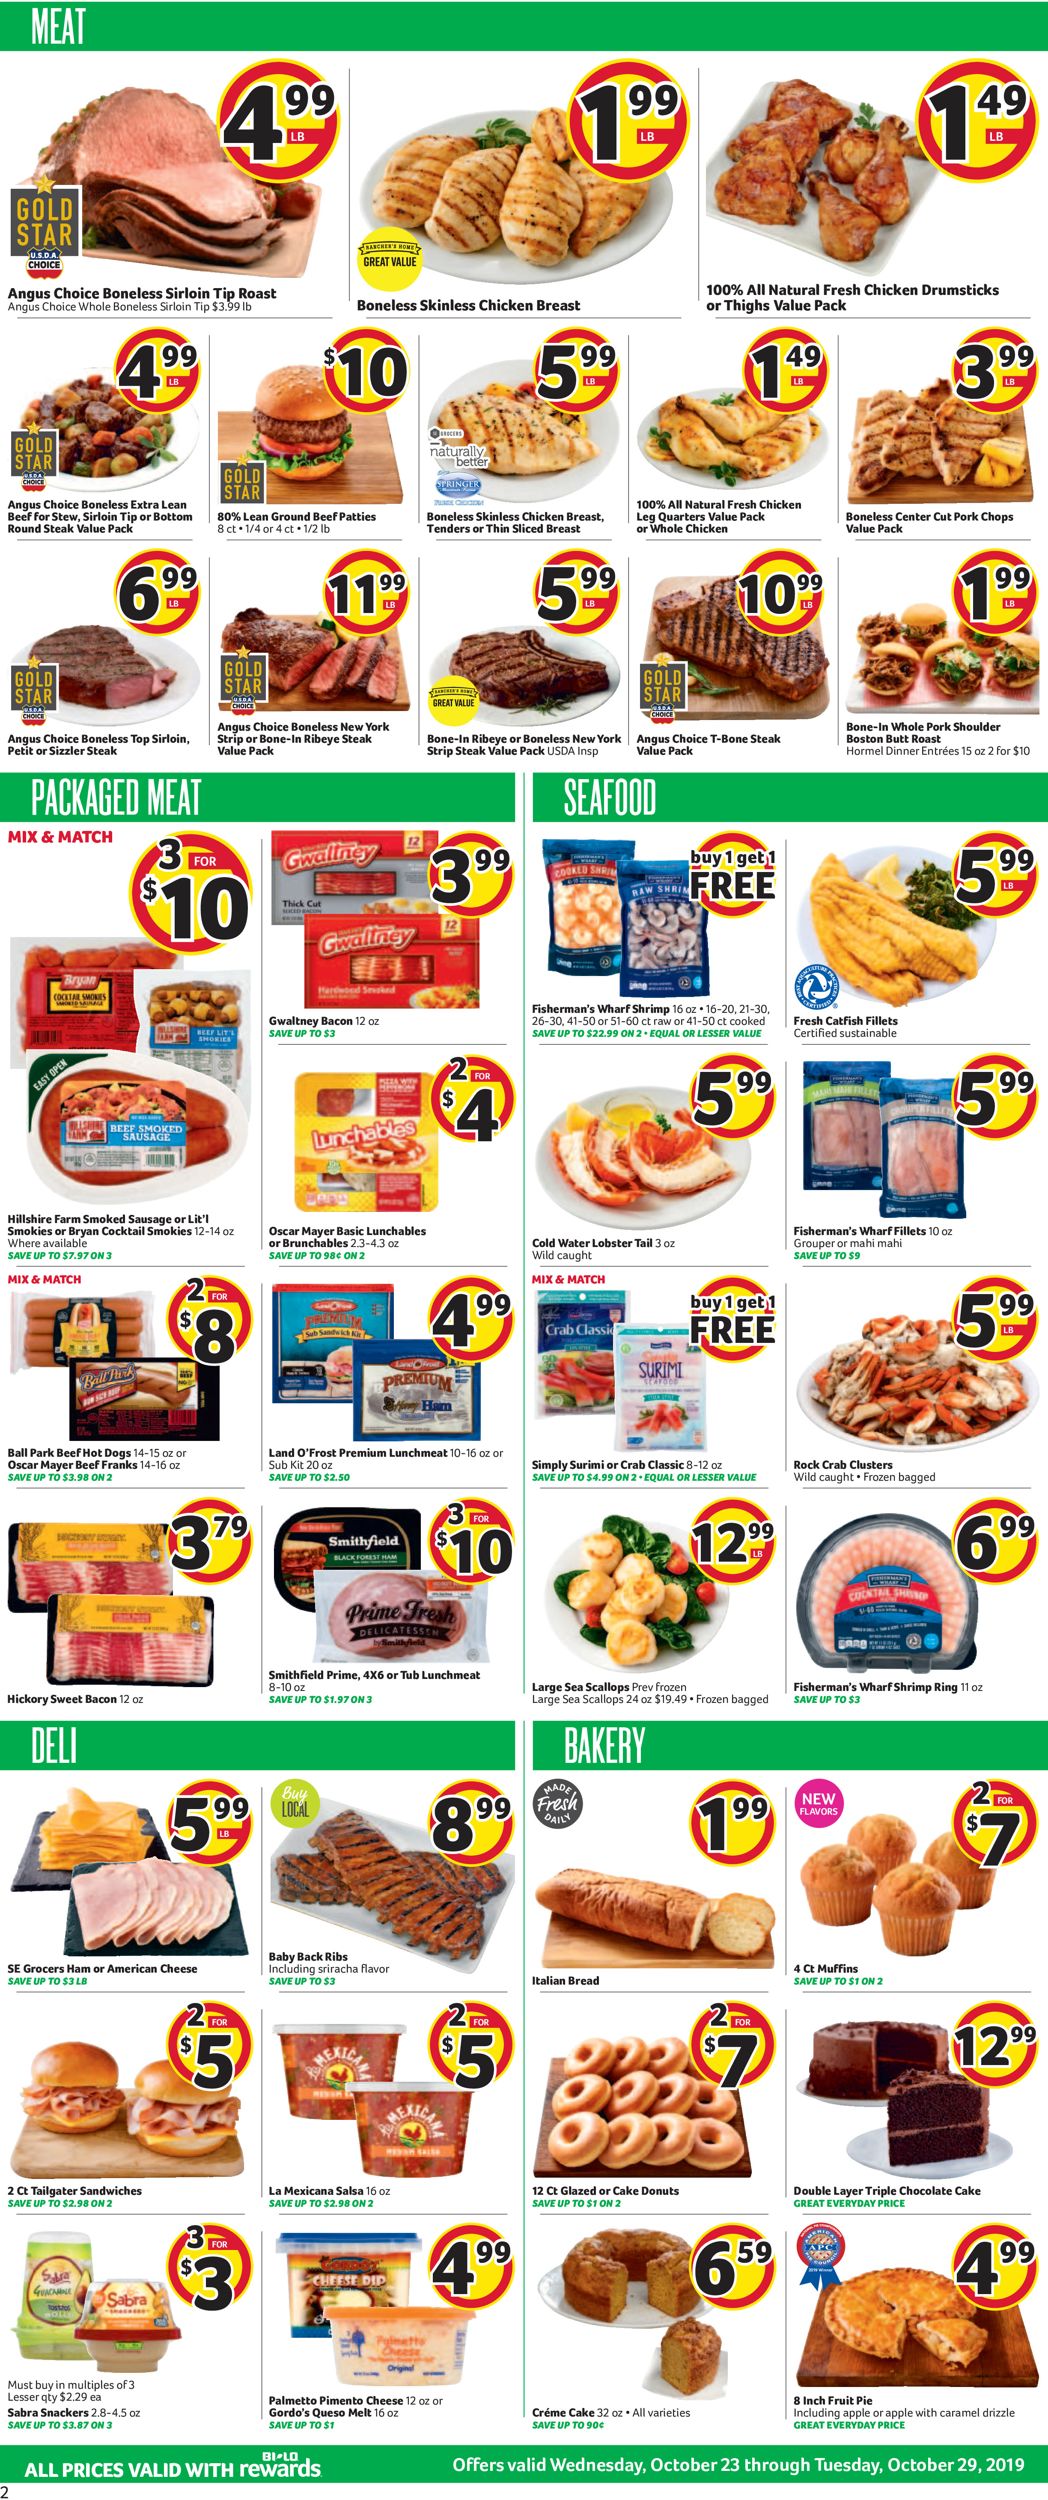 BI-LO Current weekly ad 10/23 - 10/29/2019 2 - frequent ...